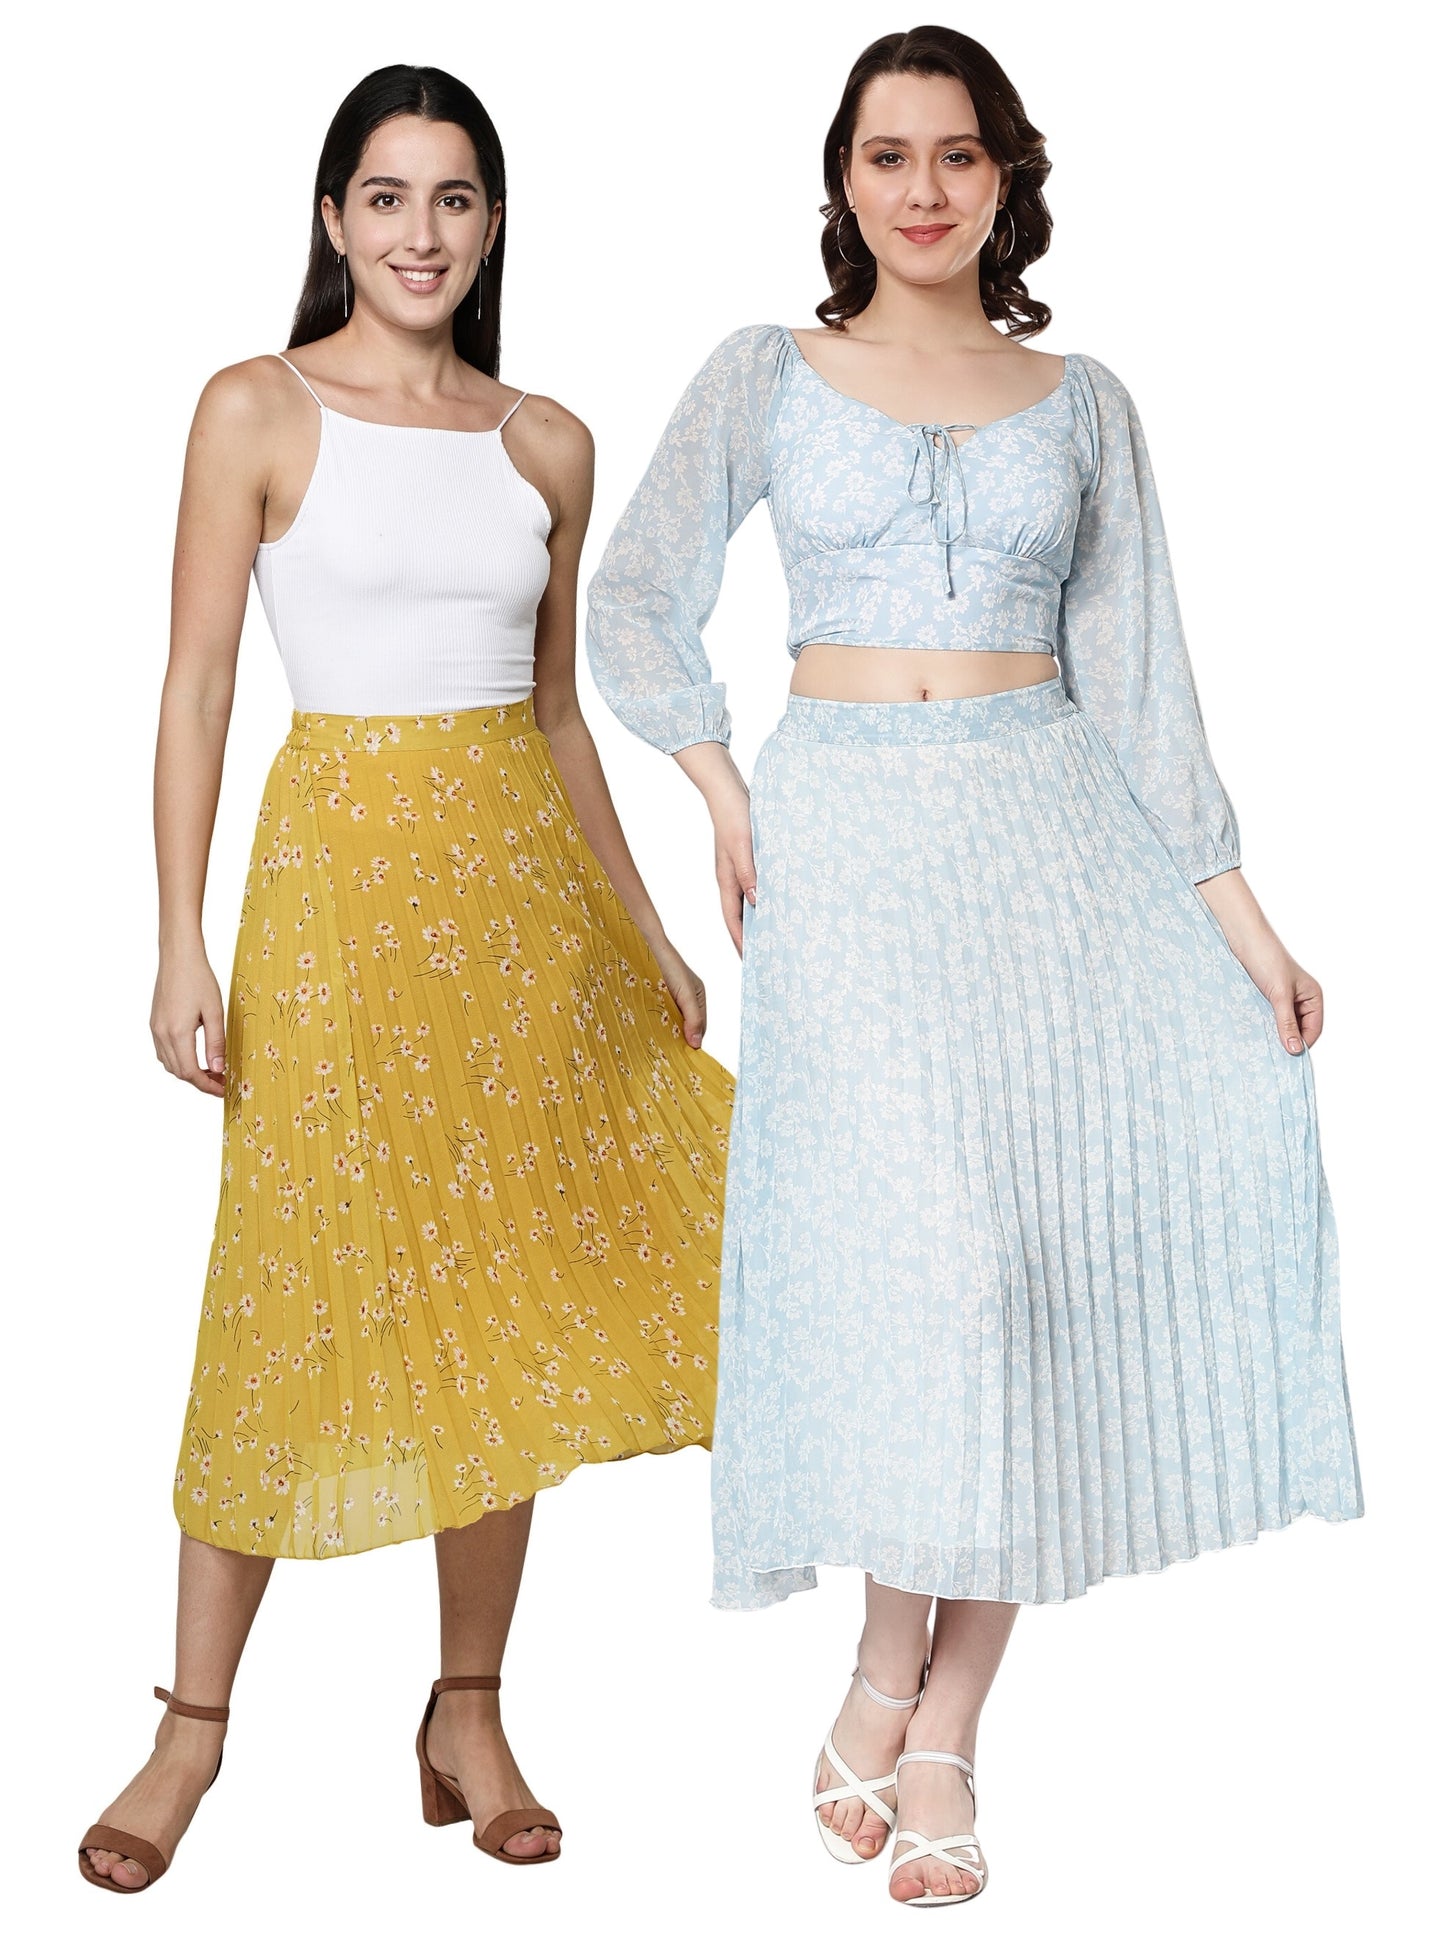 Women Georgette Floral Printed Skirts-Pack of Two-Yellow and Sky Blue